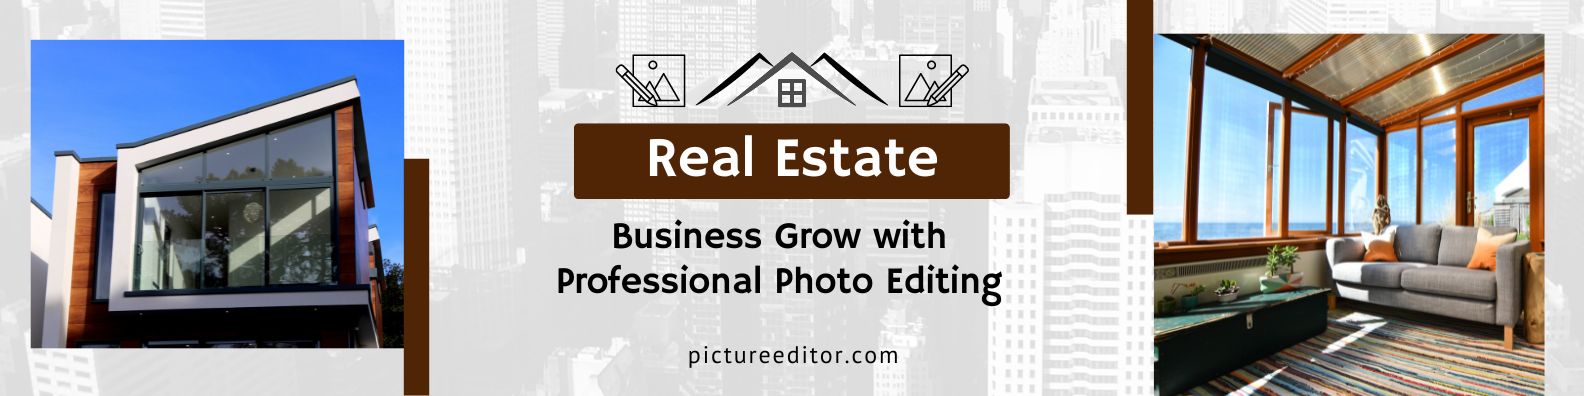 Real Estate Business Grow with Professional Photo Editing